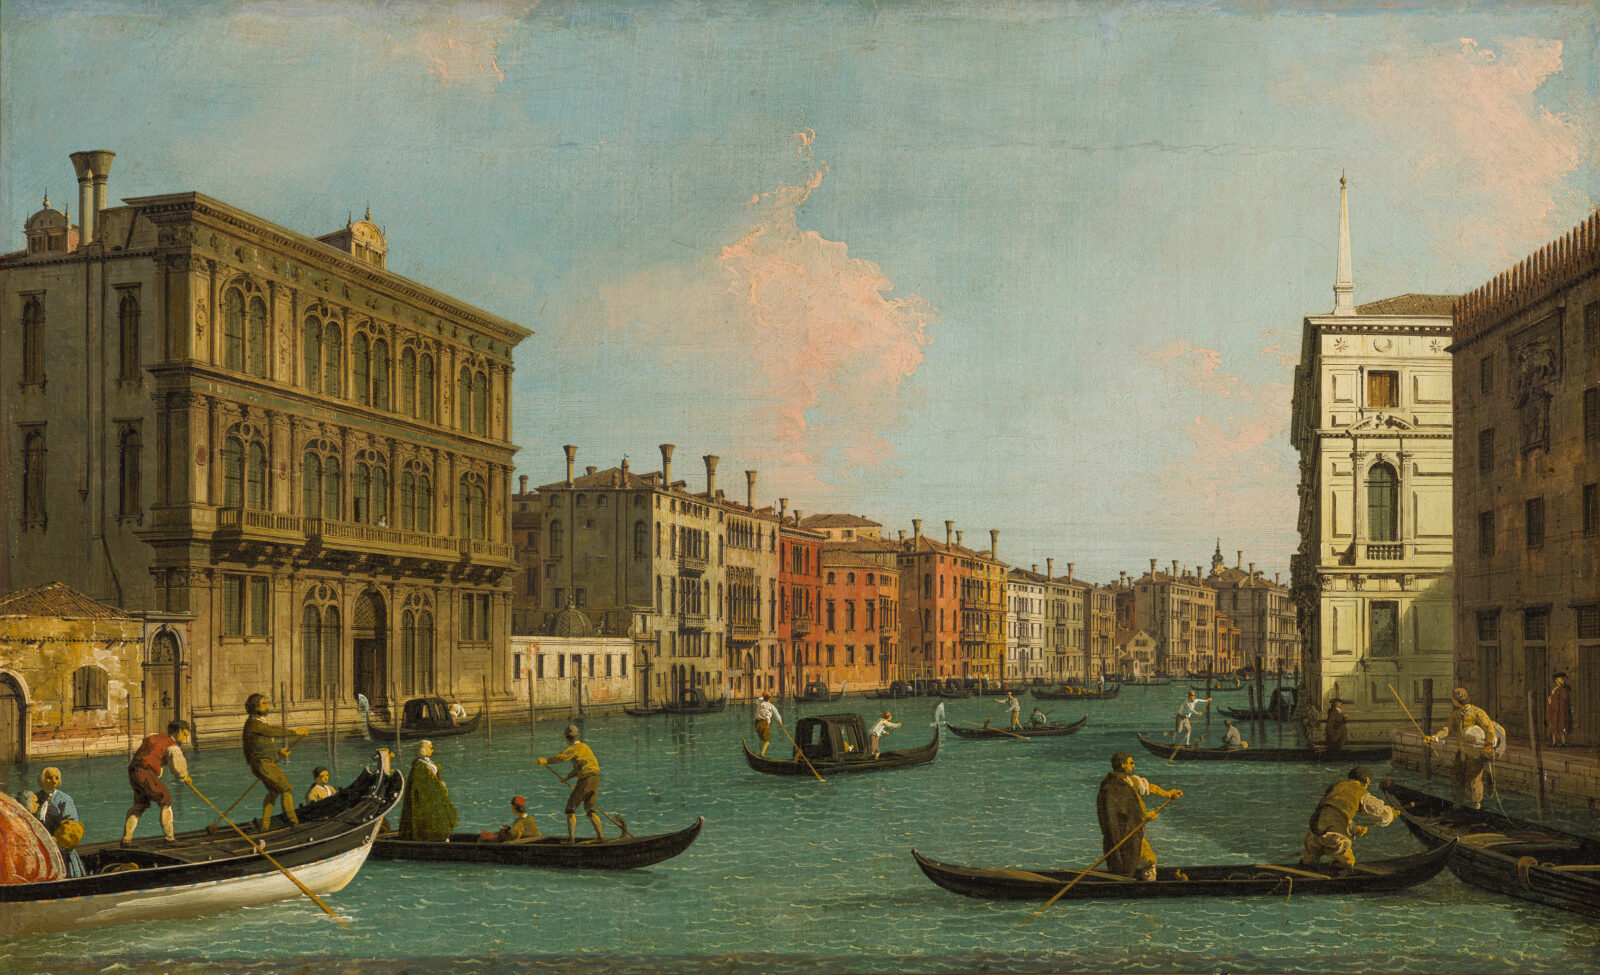 Canaletto from the Woburn Abbey Collection